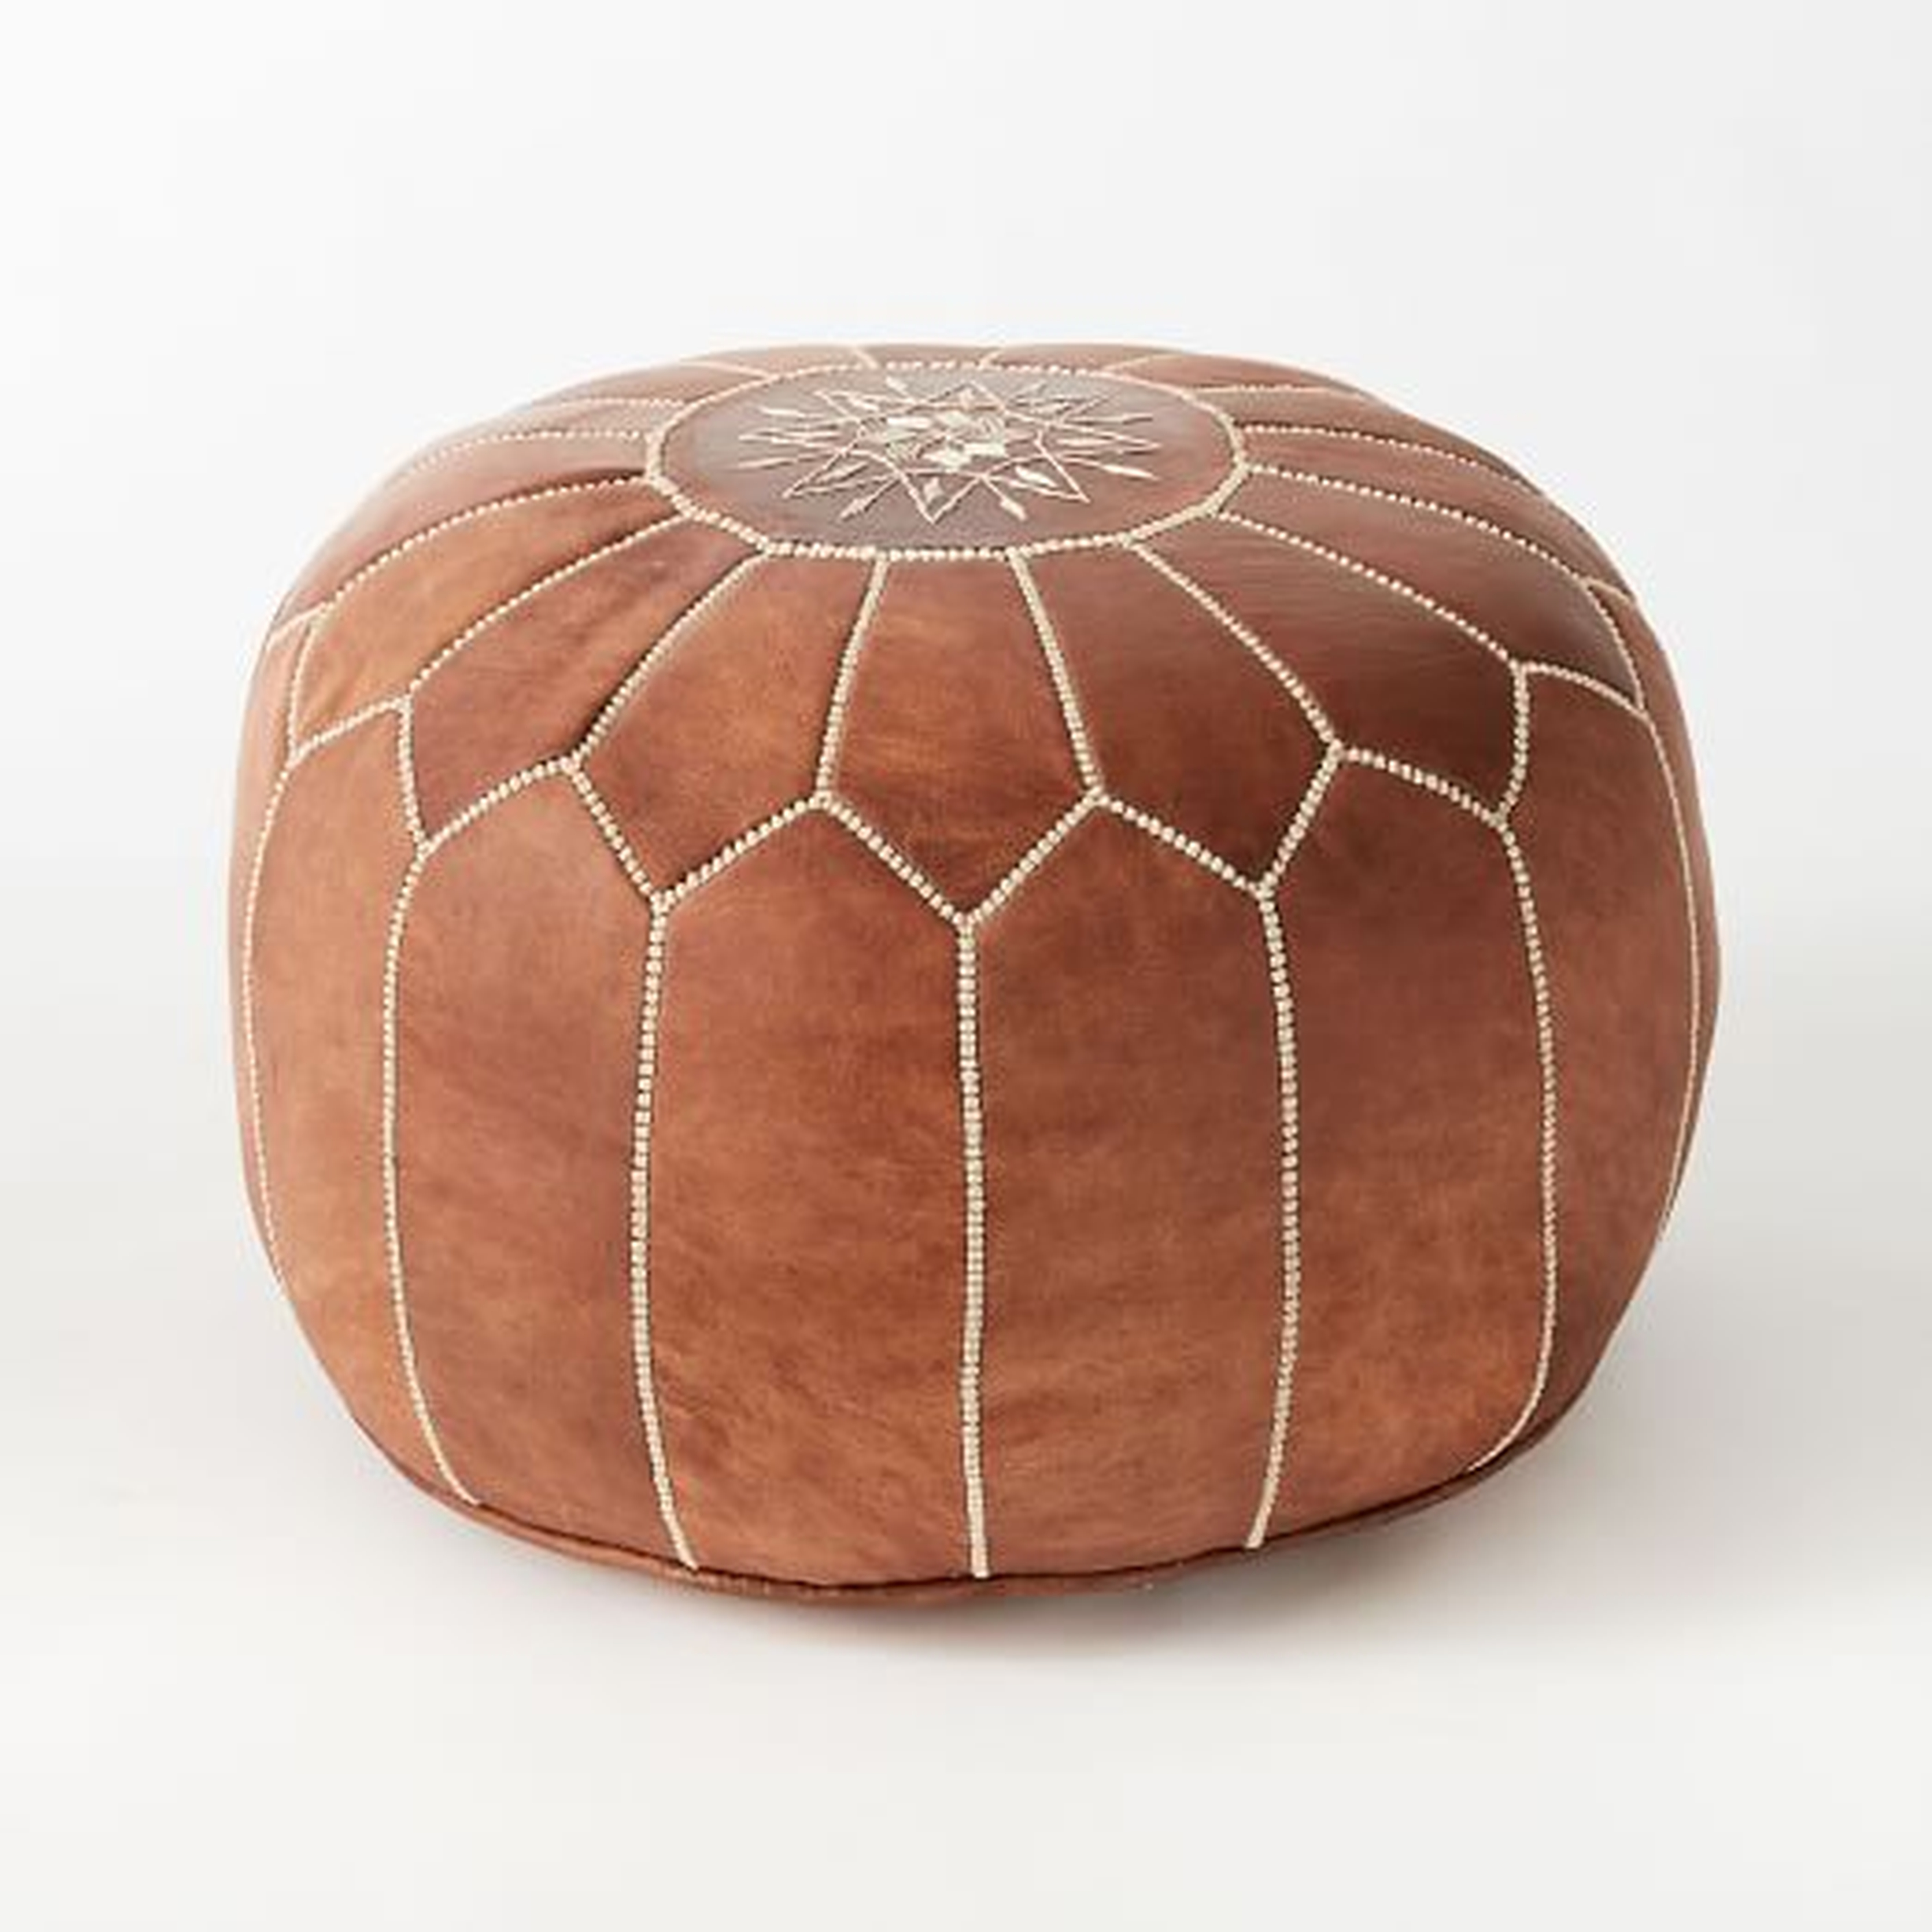 Moroccan Pouf - Small - West Elm